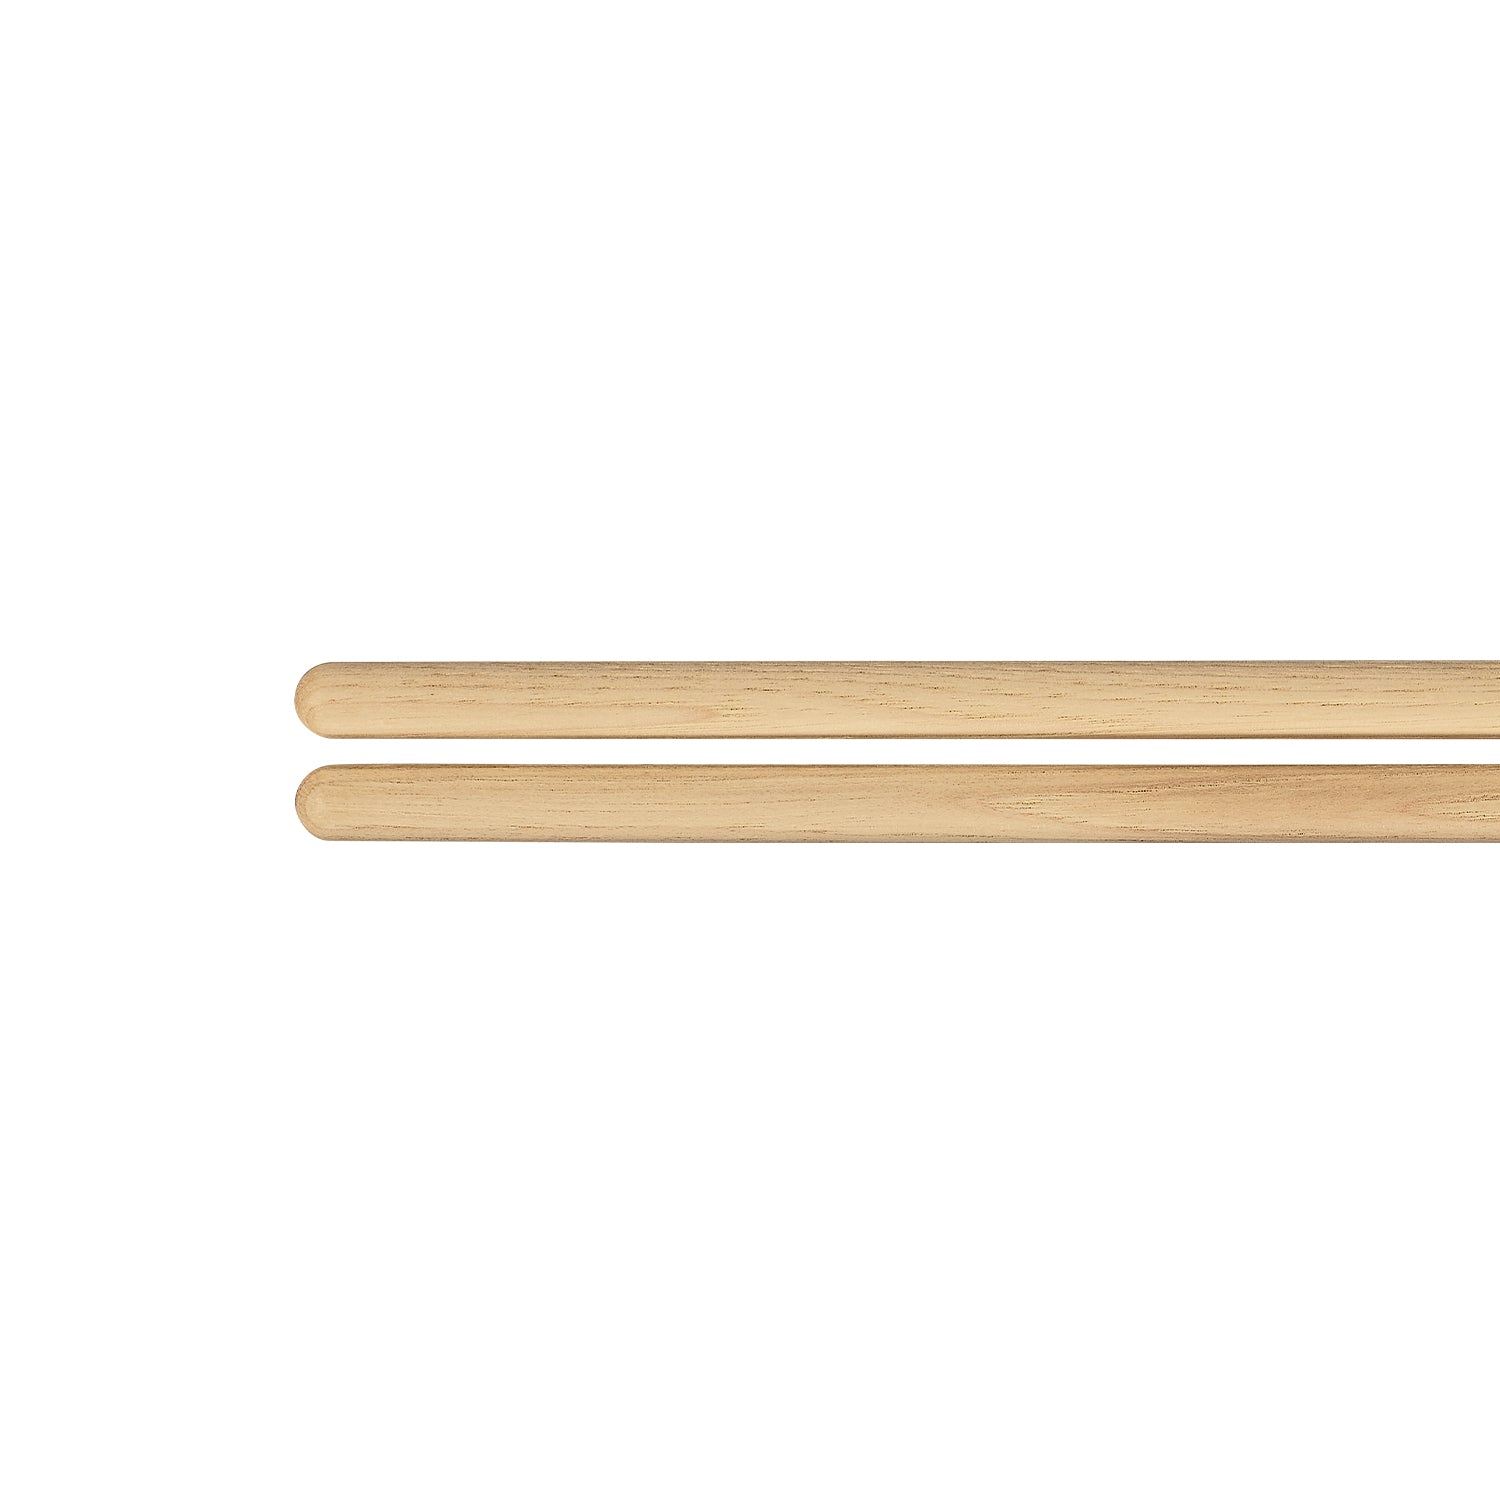 Meinl Long Timbale Sticks- 7/16 inch.